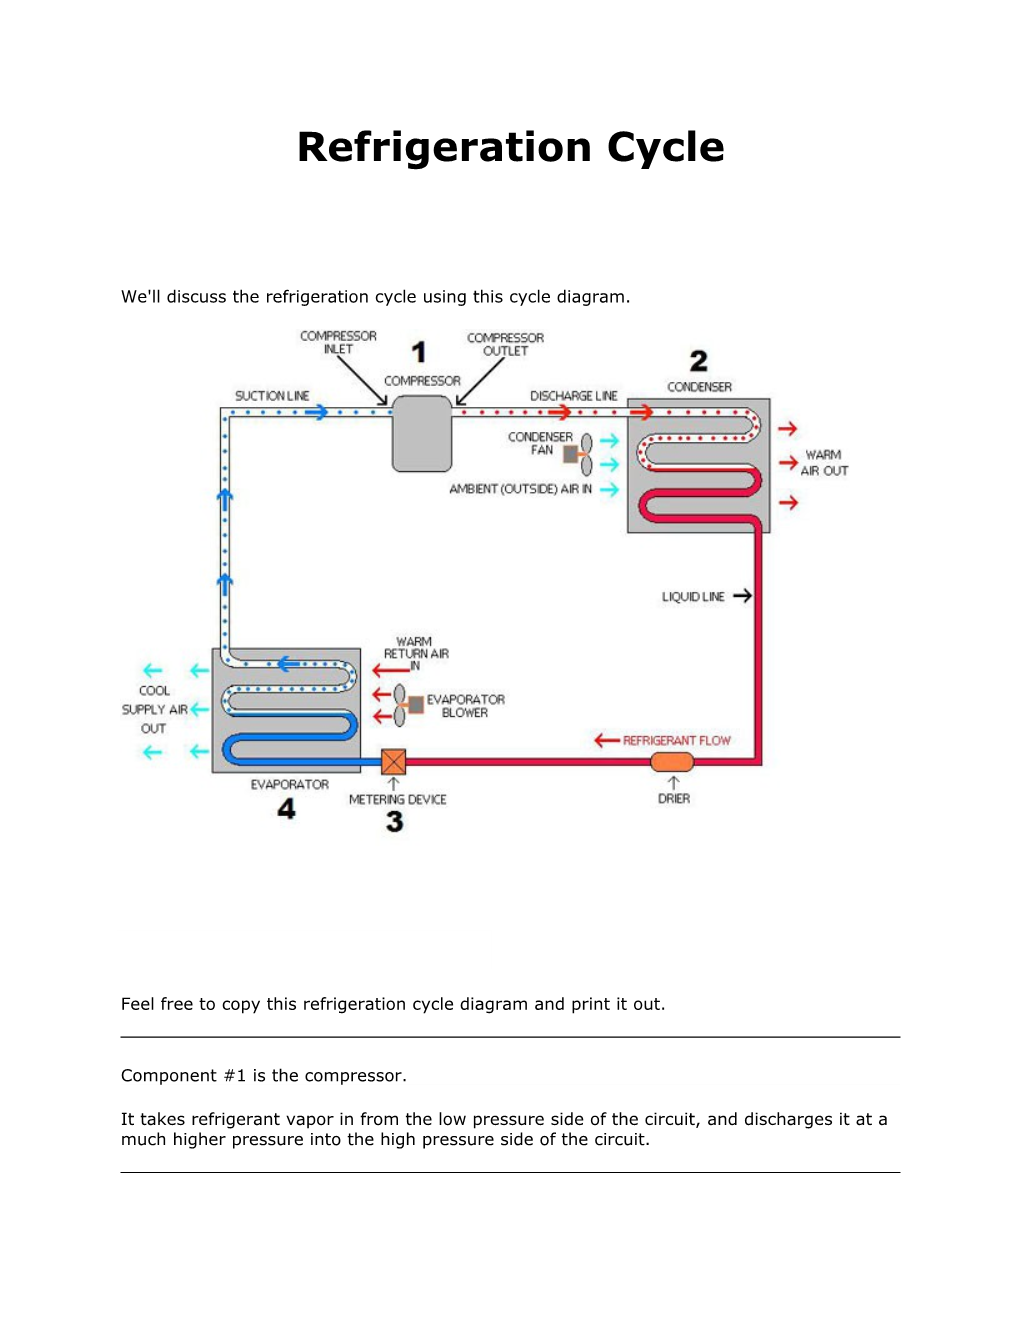 We'll Discuss the Refrigeration Cycle Using This Cycle Diagram